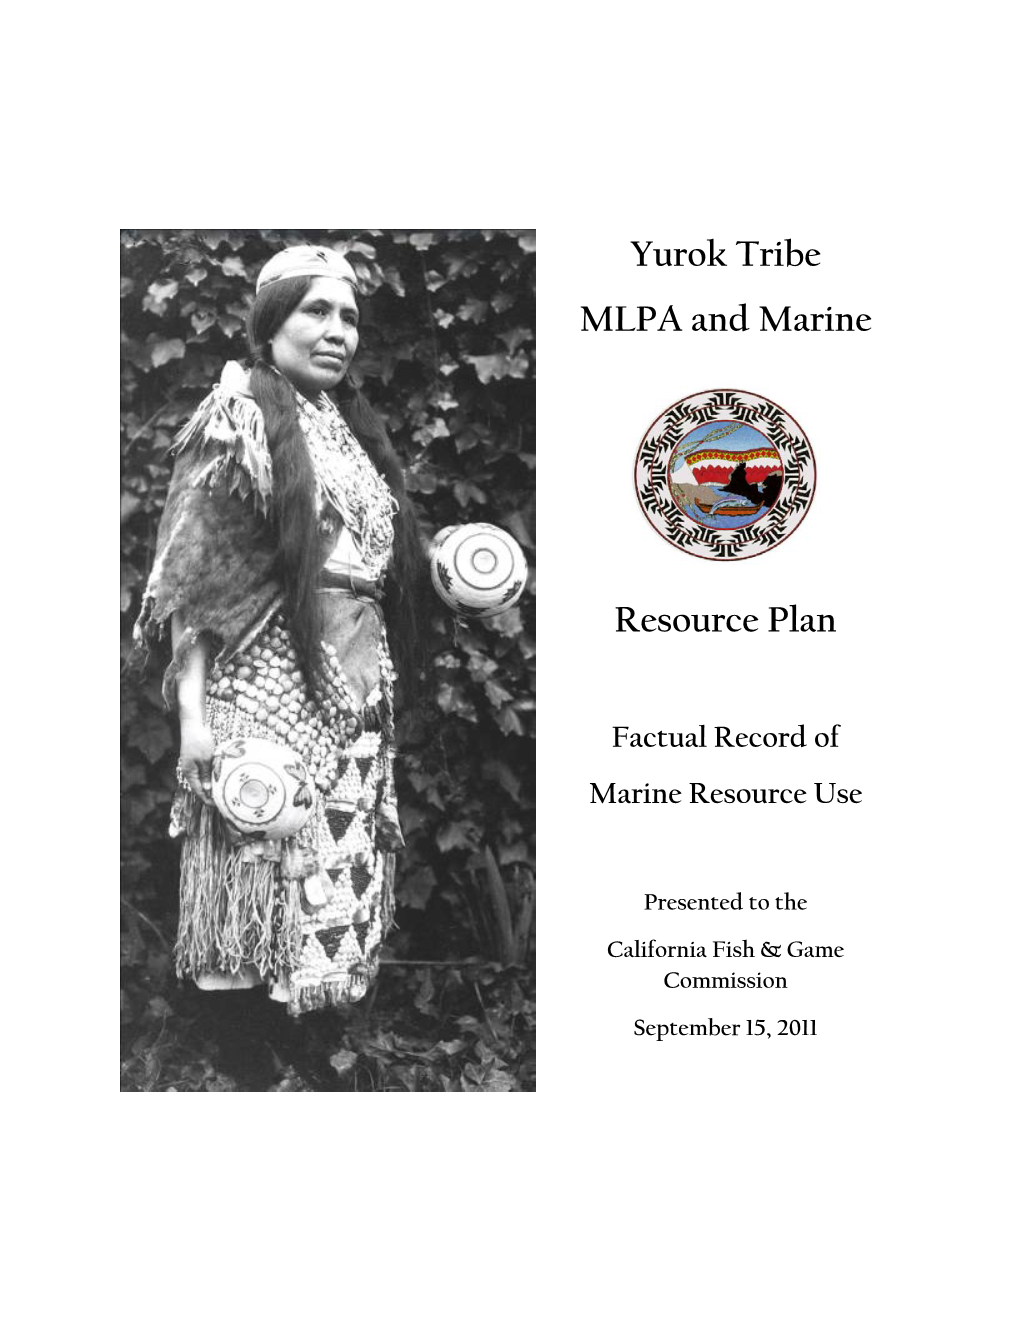 Yurok Tribe MLPA and Marine Resource Plan ‐ Factual Record of Marine Resource Use Submission to the California Fish and Game Commission August 29, 2011